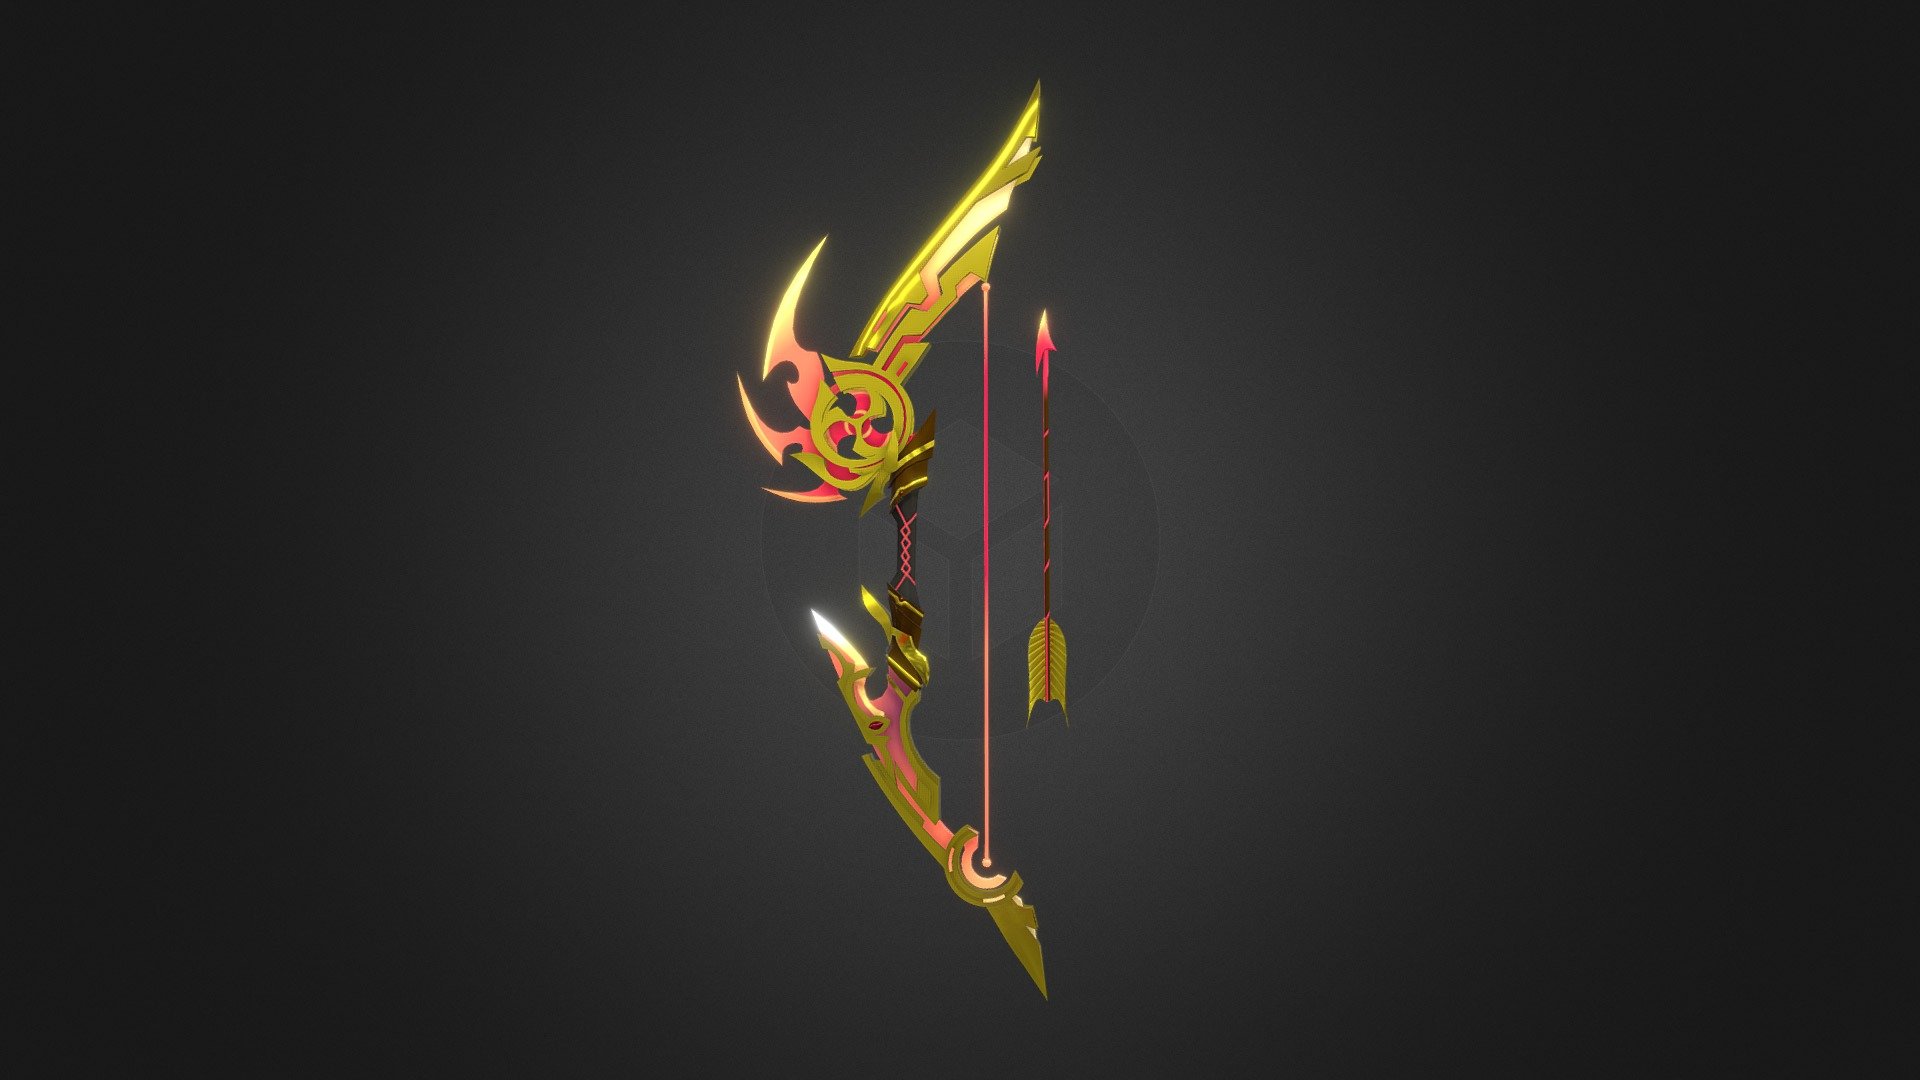 Weapon in the game genshin impact but in a different color
https://genshin-impact.fandom.com/wiki/Thundering_Pulse - Thundering Pulse - Bow - Download Free 3D model by ndnguyen3d 3d model